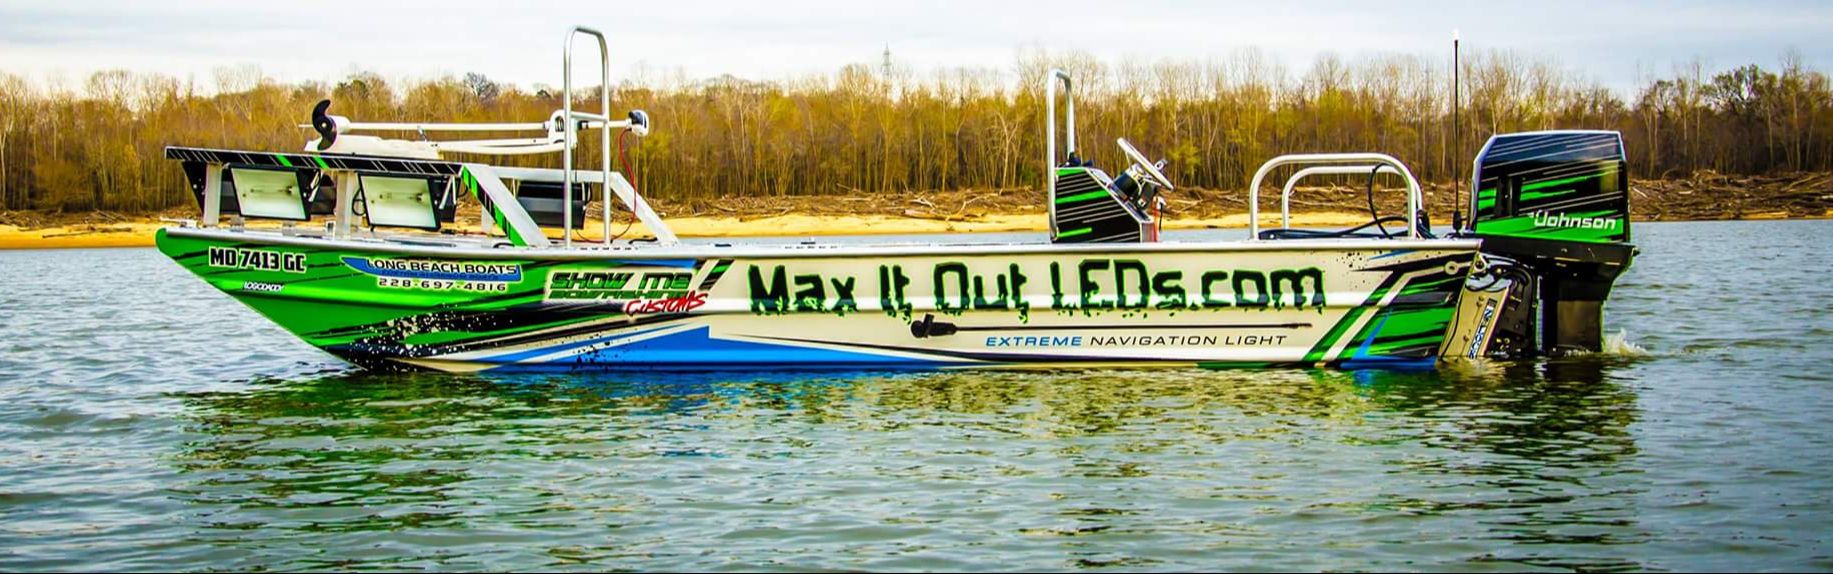 Max It Out Leds - Extreme Navigation Stern Lights for Boats